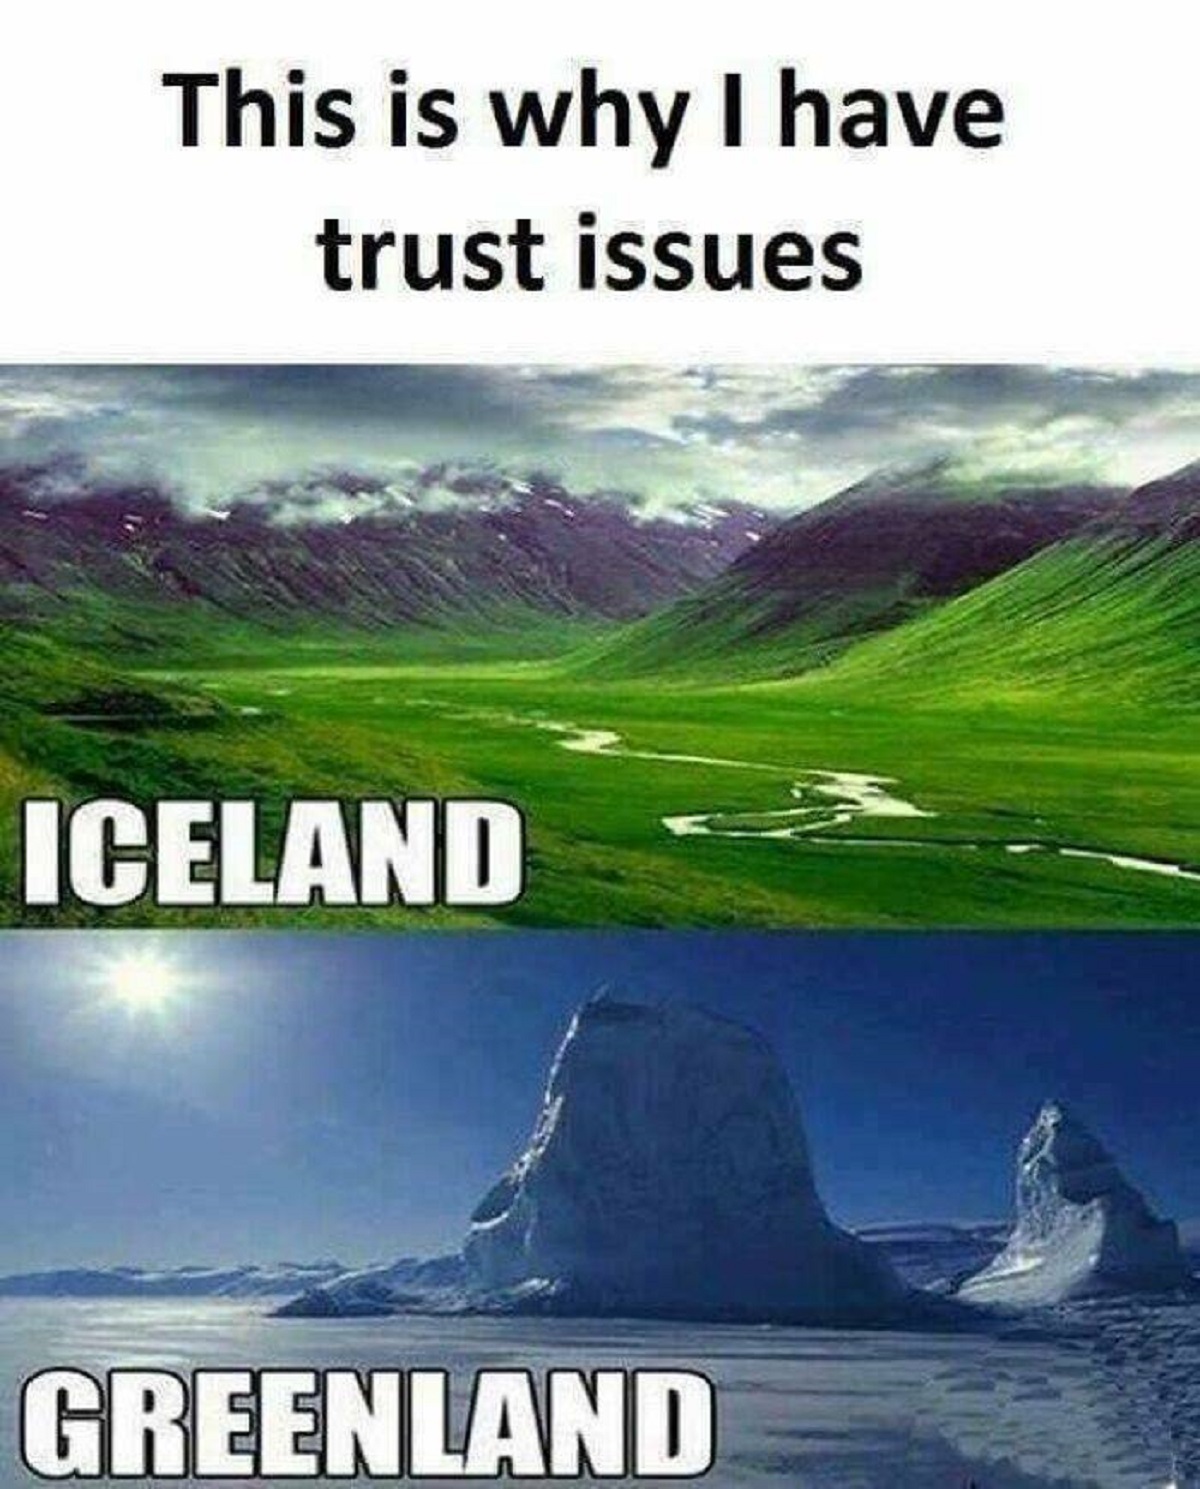 trust issues iceland greenland - This is why I have trust issues Iceland Greenland